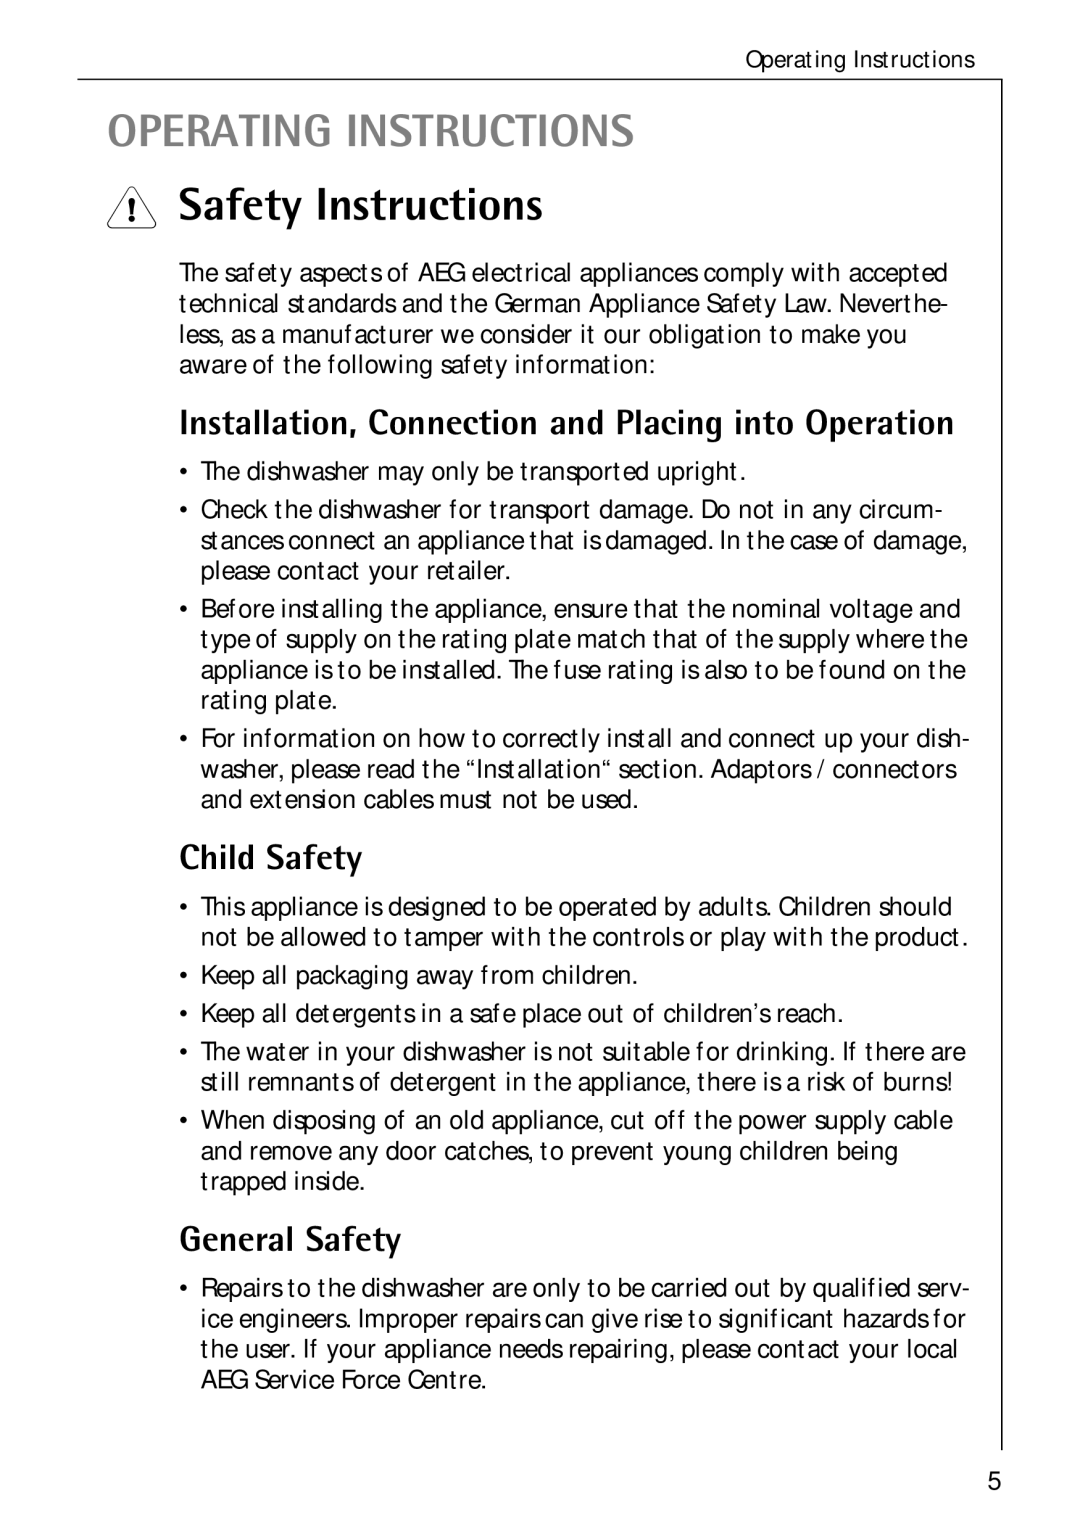 Electrolux 60750 VI Safety Instructions, Installation, Connection and Placing into Operation, Child Safety, General Safety 